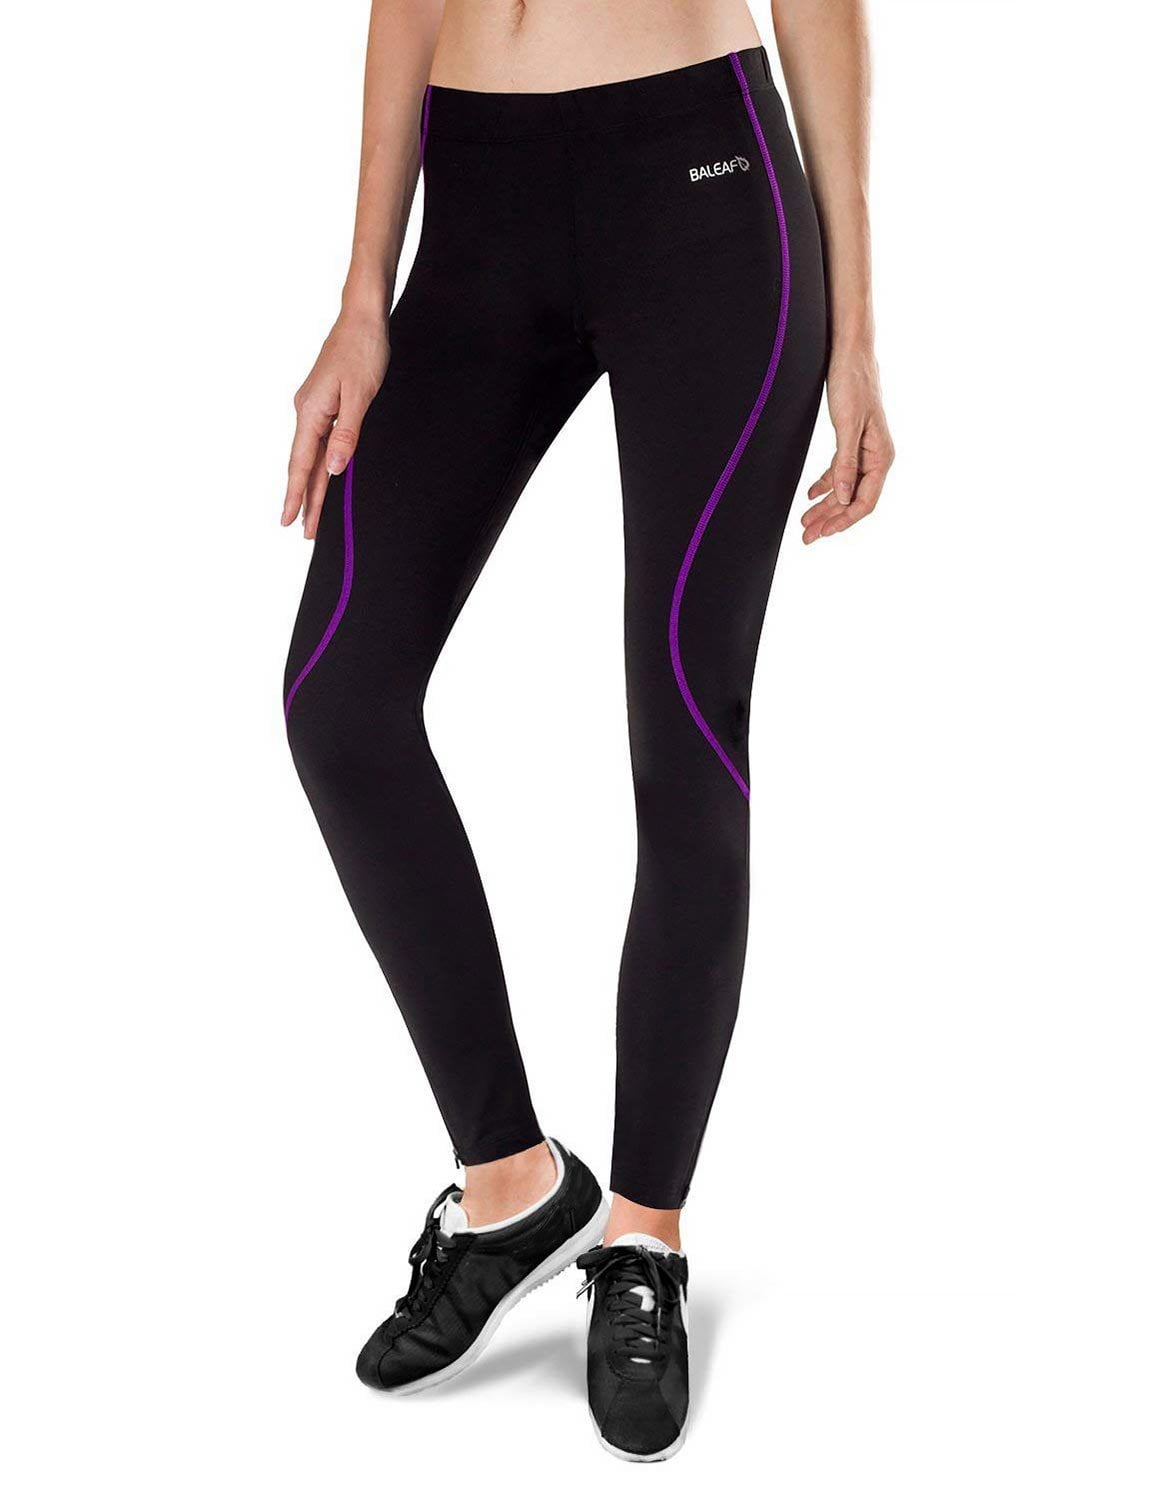 BALEAF Women's Fleece Lined Leggings Cold Weather Running Tights Winter  Thermal Hiking Biking Cycling Pants Purple Line Size L 